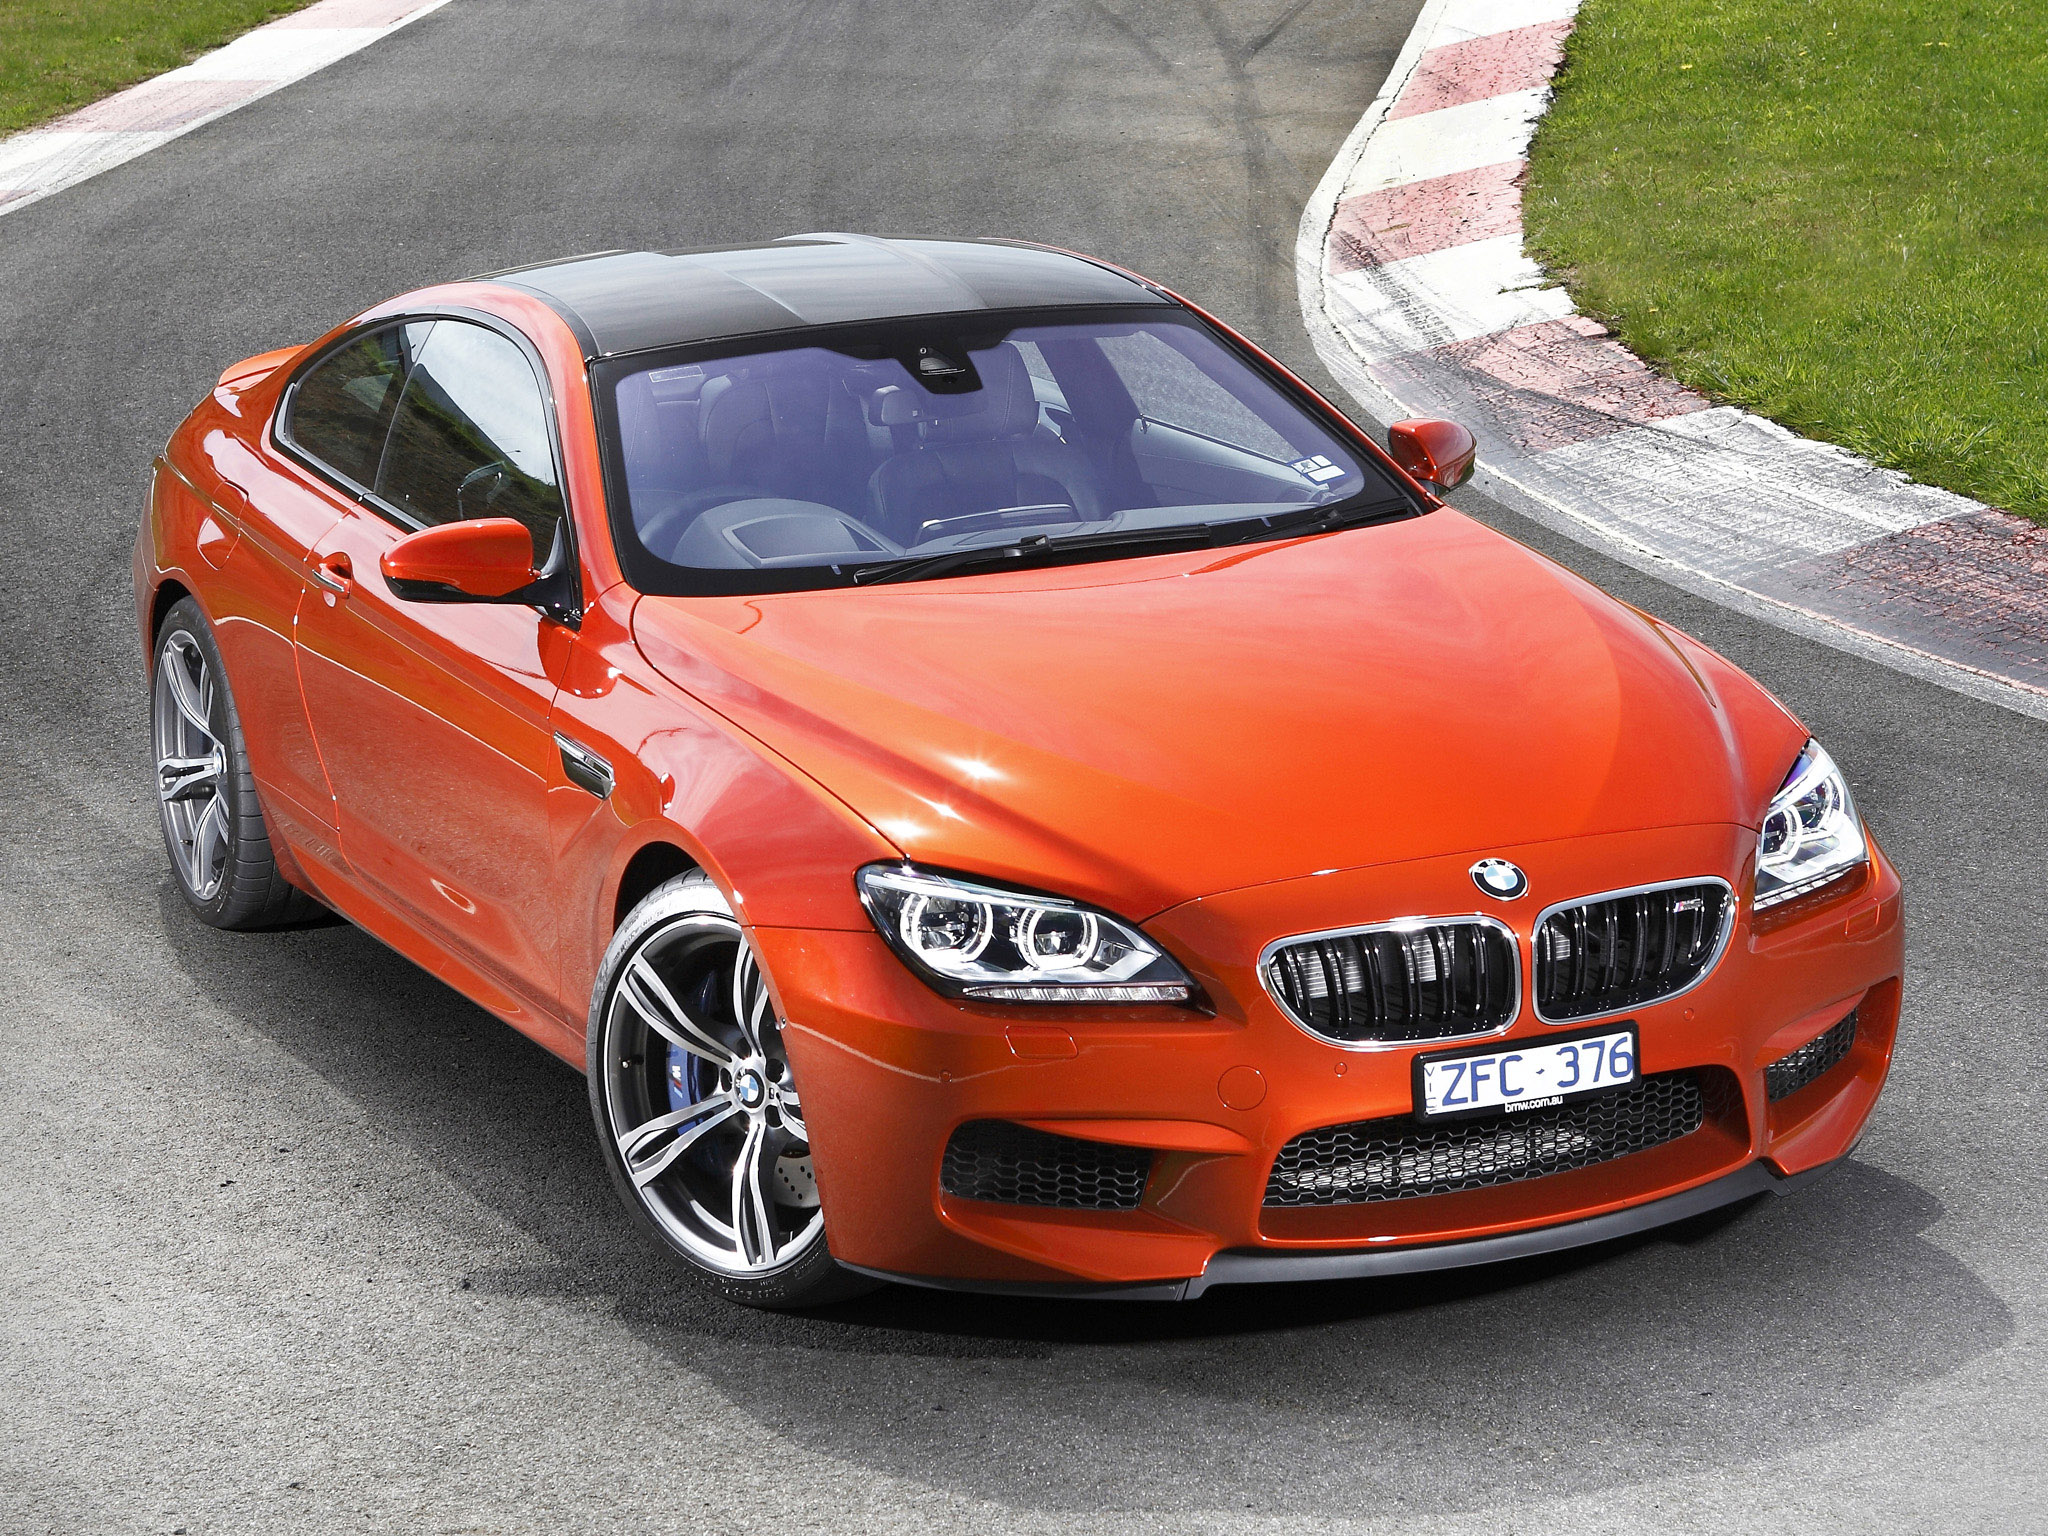 BMW m6 f12 Coupe (2012)